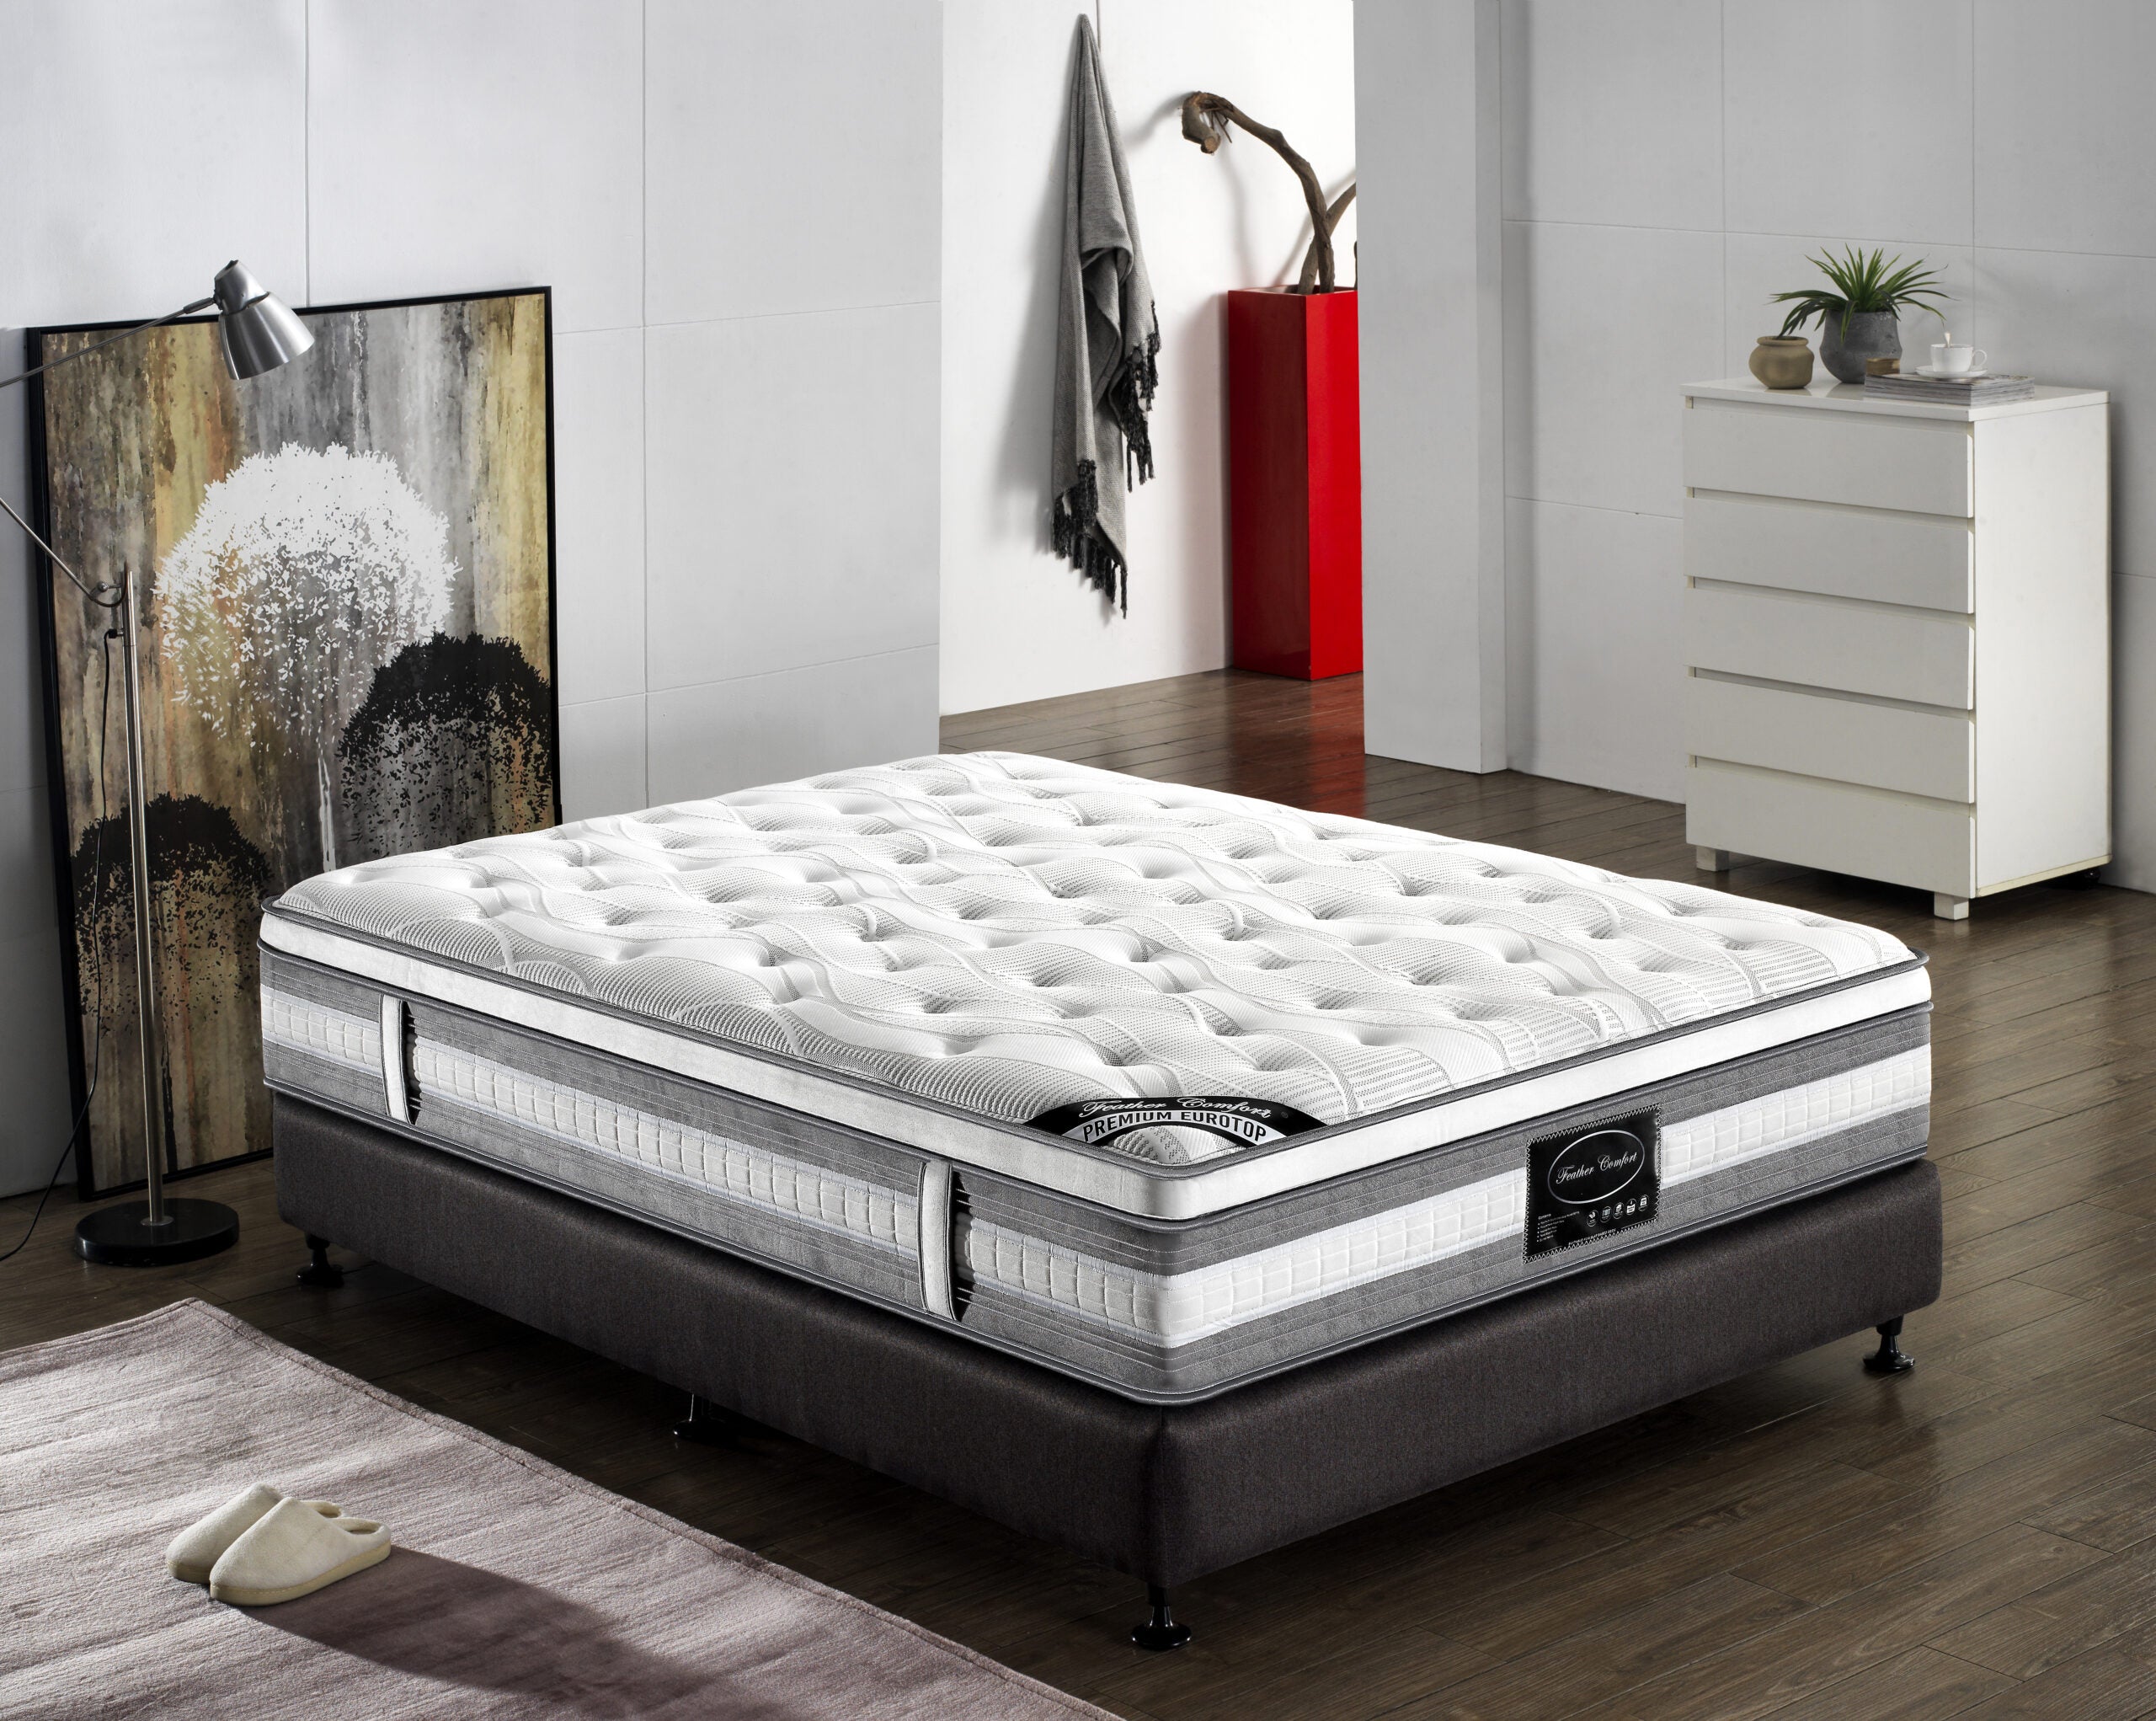 Premium Euro Top Rolled up Mattress Double Size